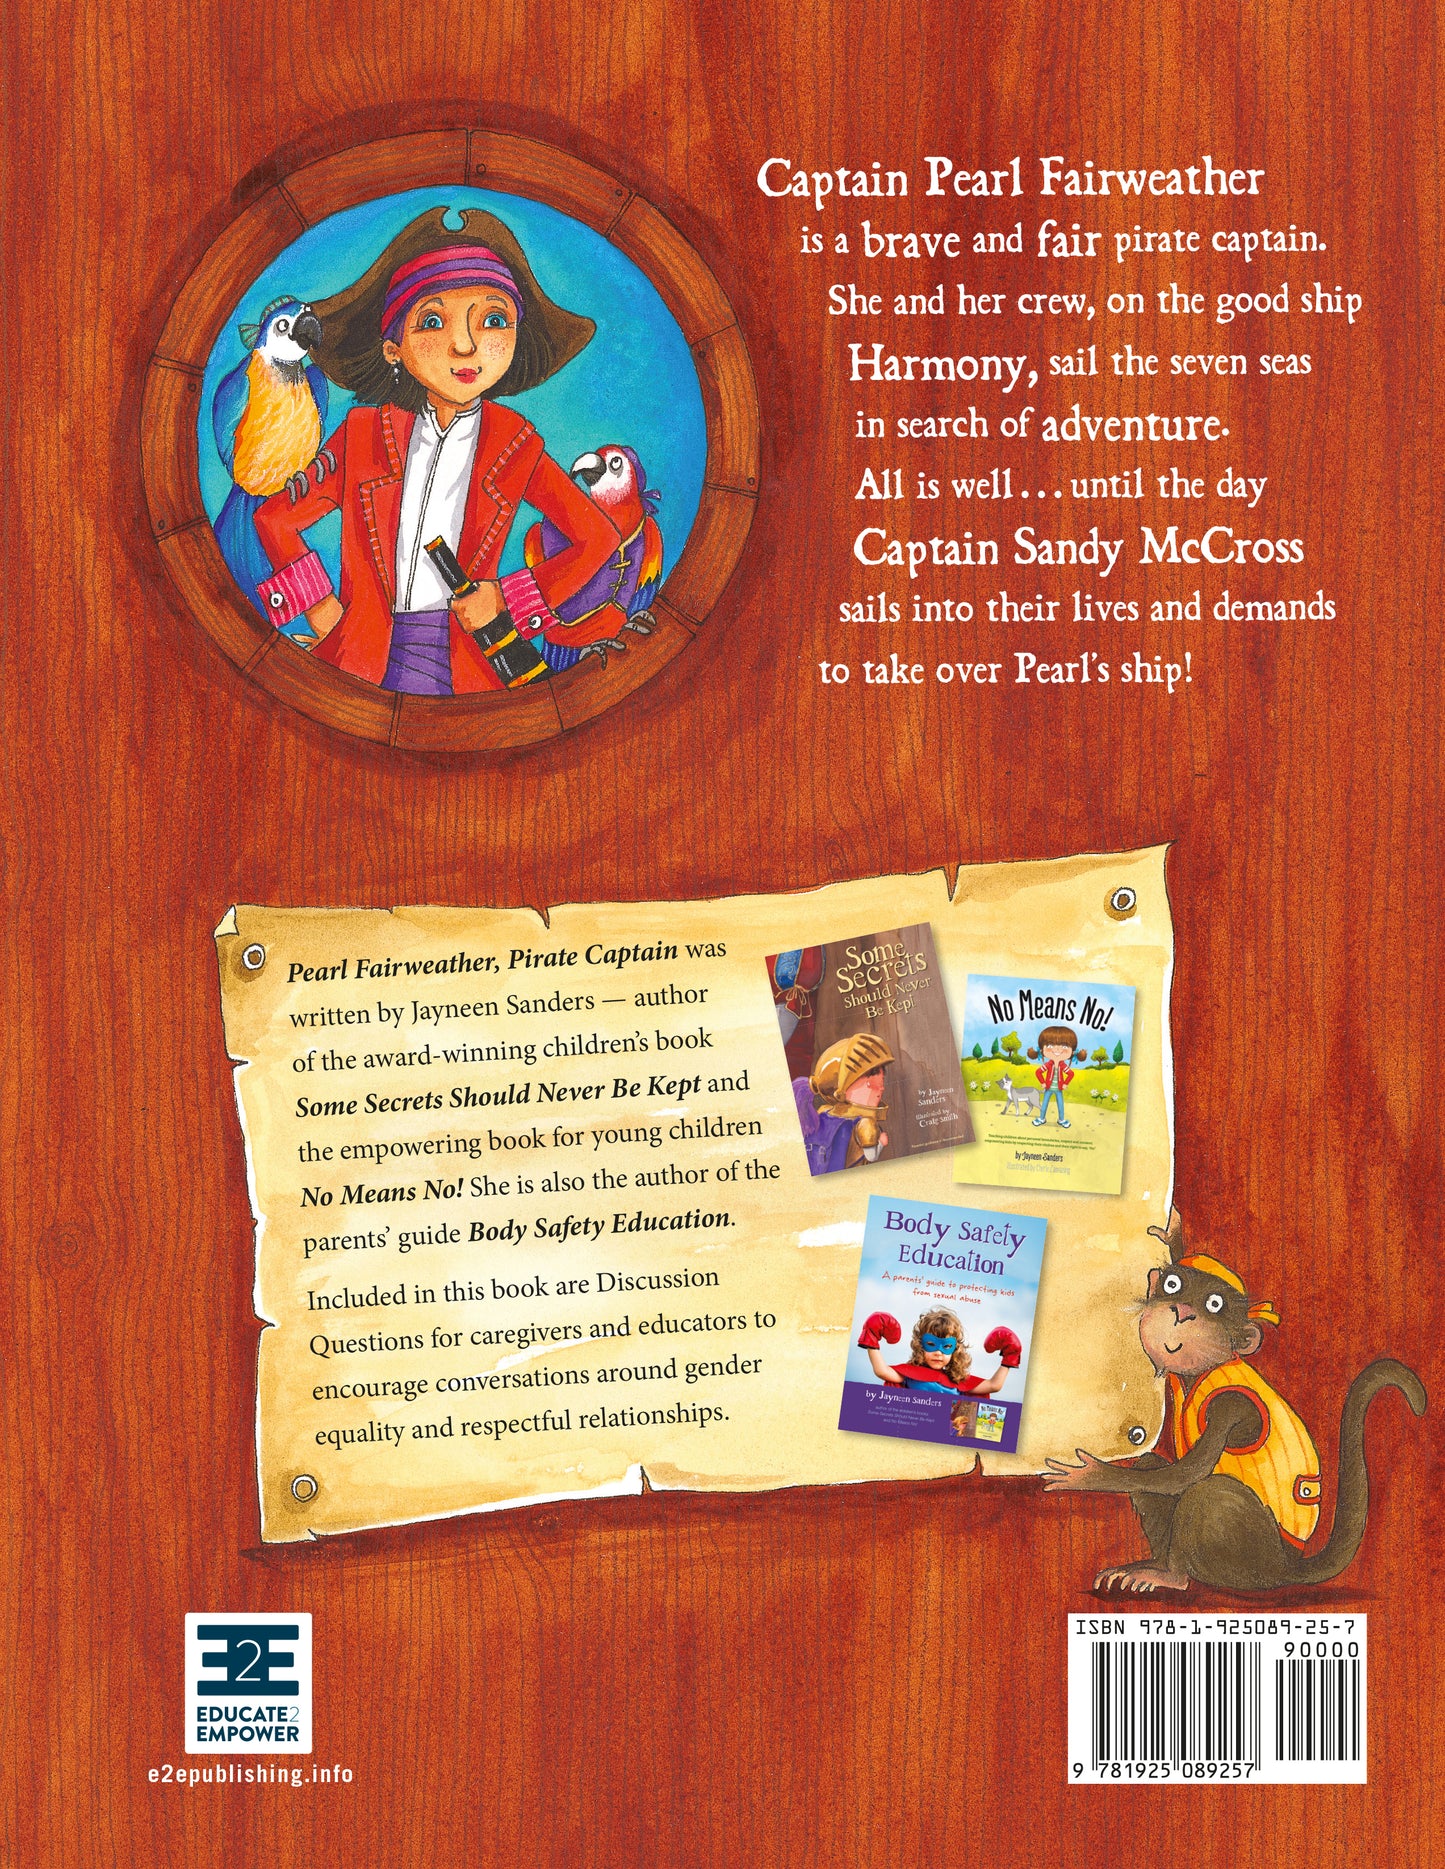 The back cover of the book ‘Pearl Fairweather Pirate Captain’ by Jayneen Sanders.